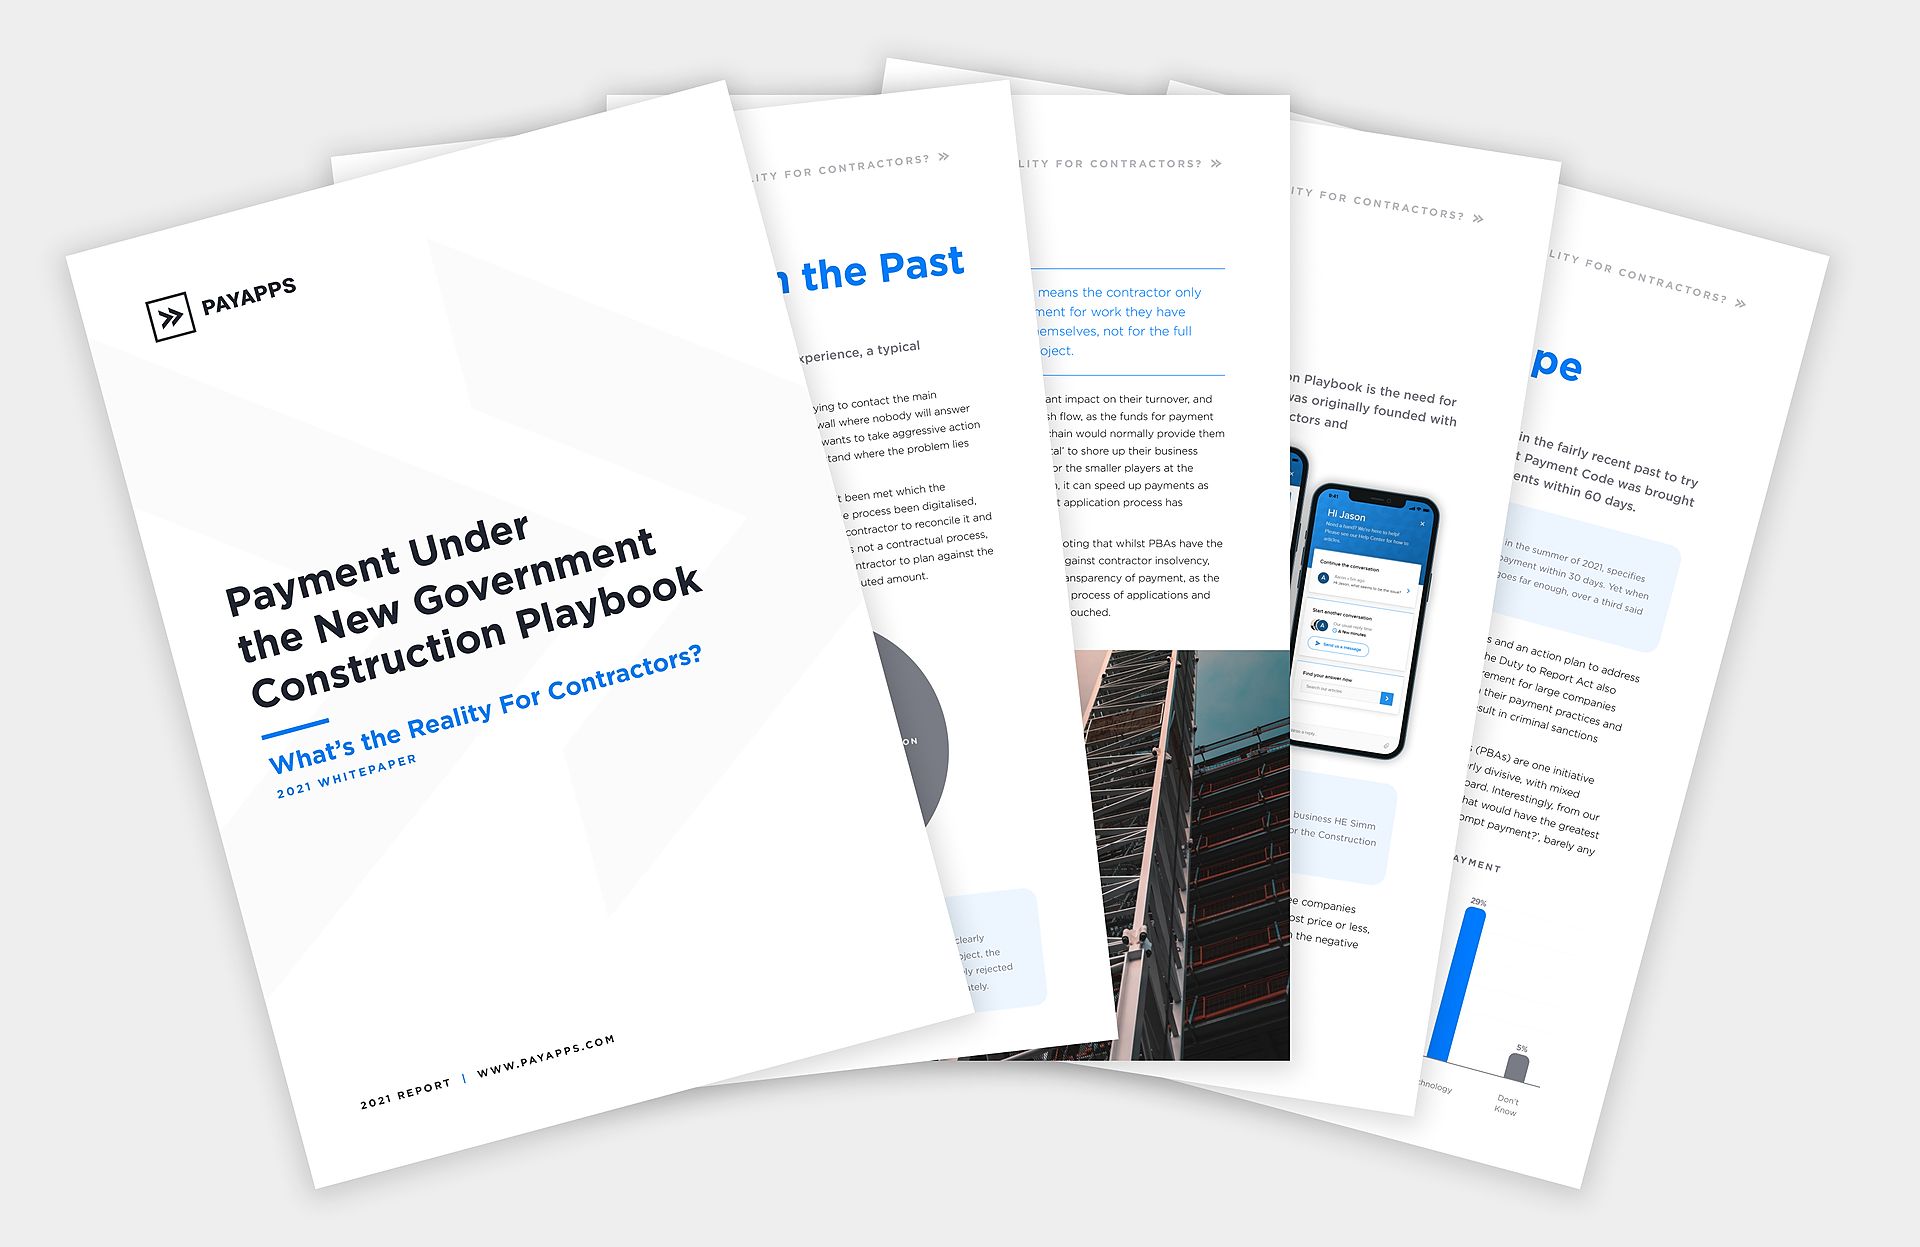 Payment under the NEW Government Construction Playbook – What’s the reality for contractors?